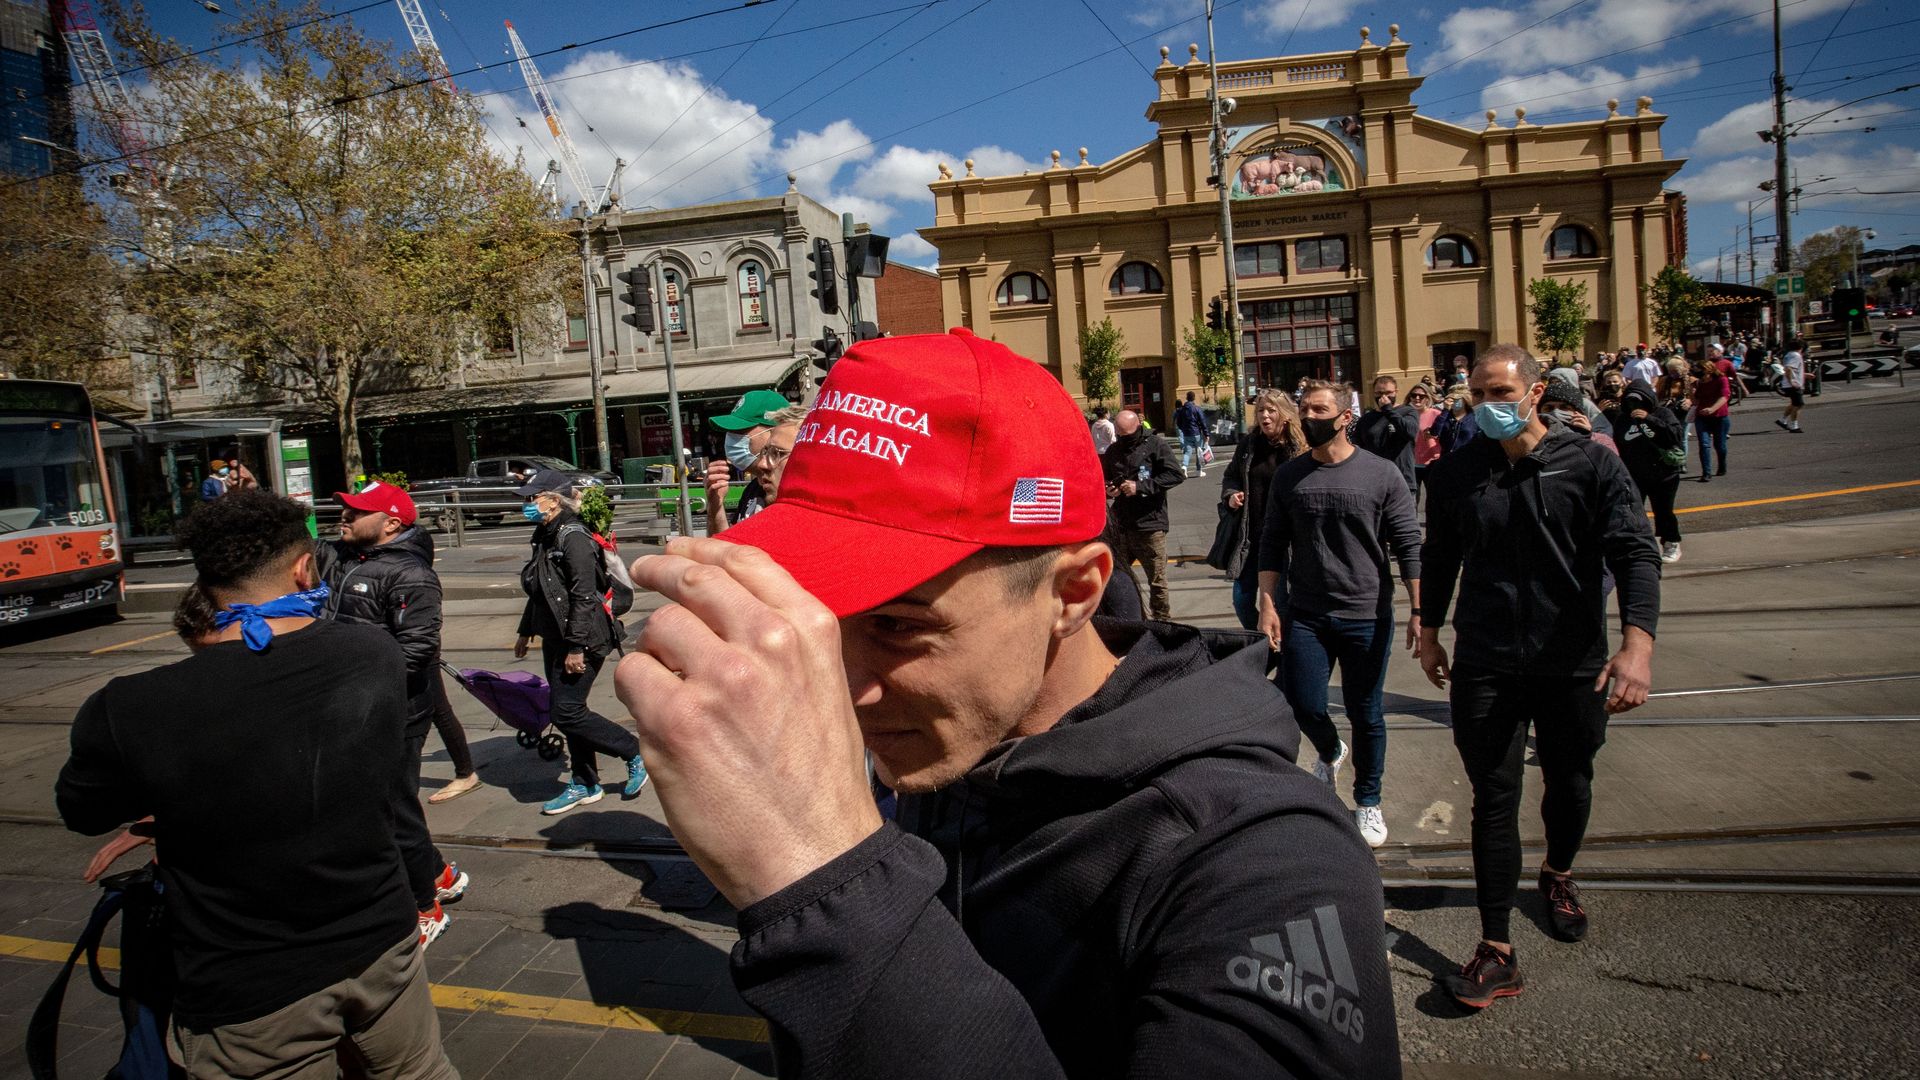 Protesters begin to march from the Queen Victoria Market on September 13, 2020 in Melbourne, Australia.